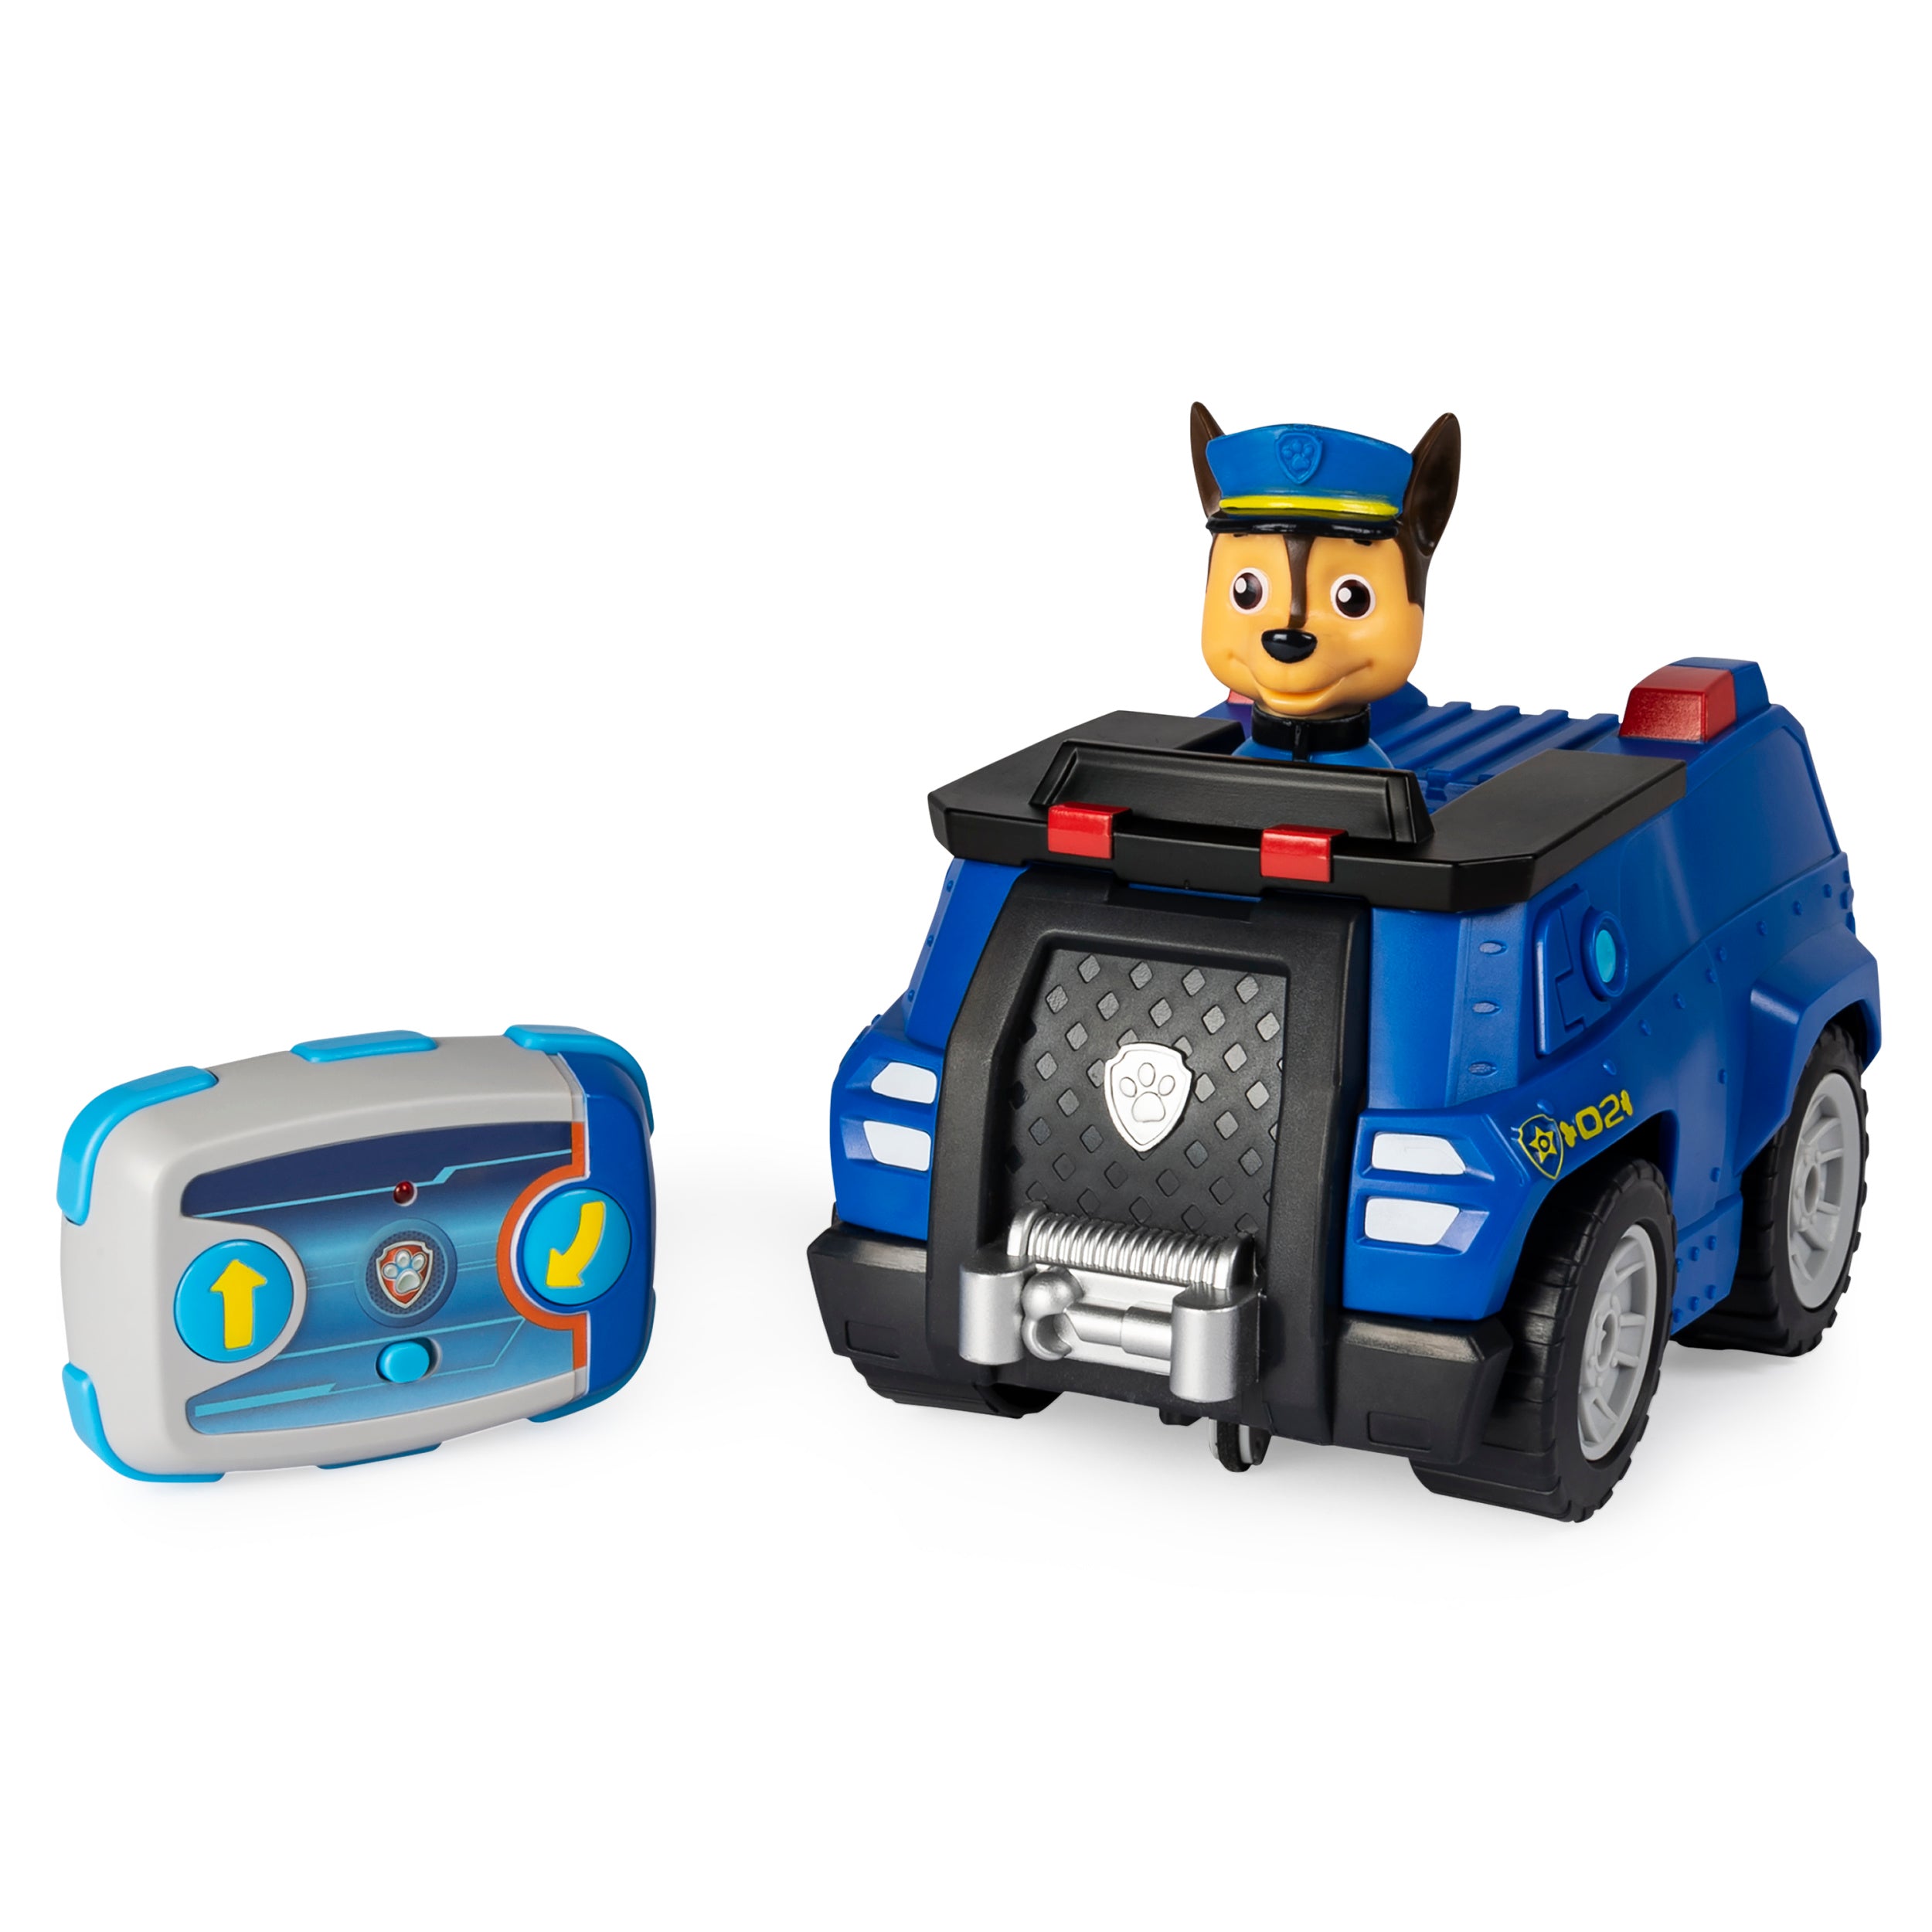 Buy Paw Patrol, Tracker's Jungle Cruiser Vehicle with Collectible Figure,  for Kids Aged 3 and up, Multicolor, (6061801) Online at Low Prices in India  